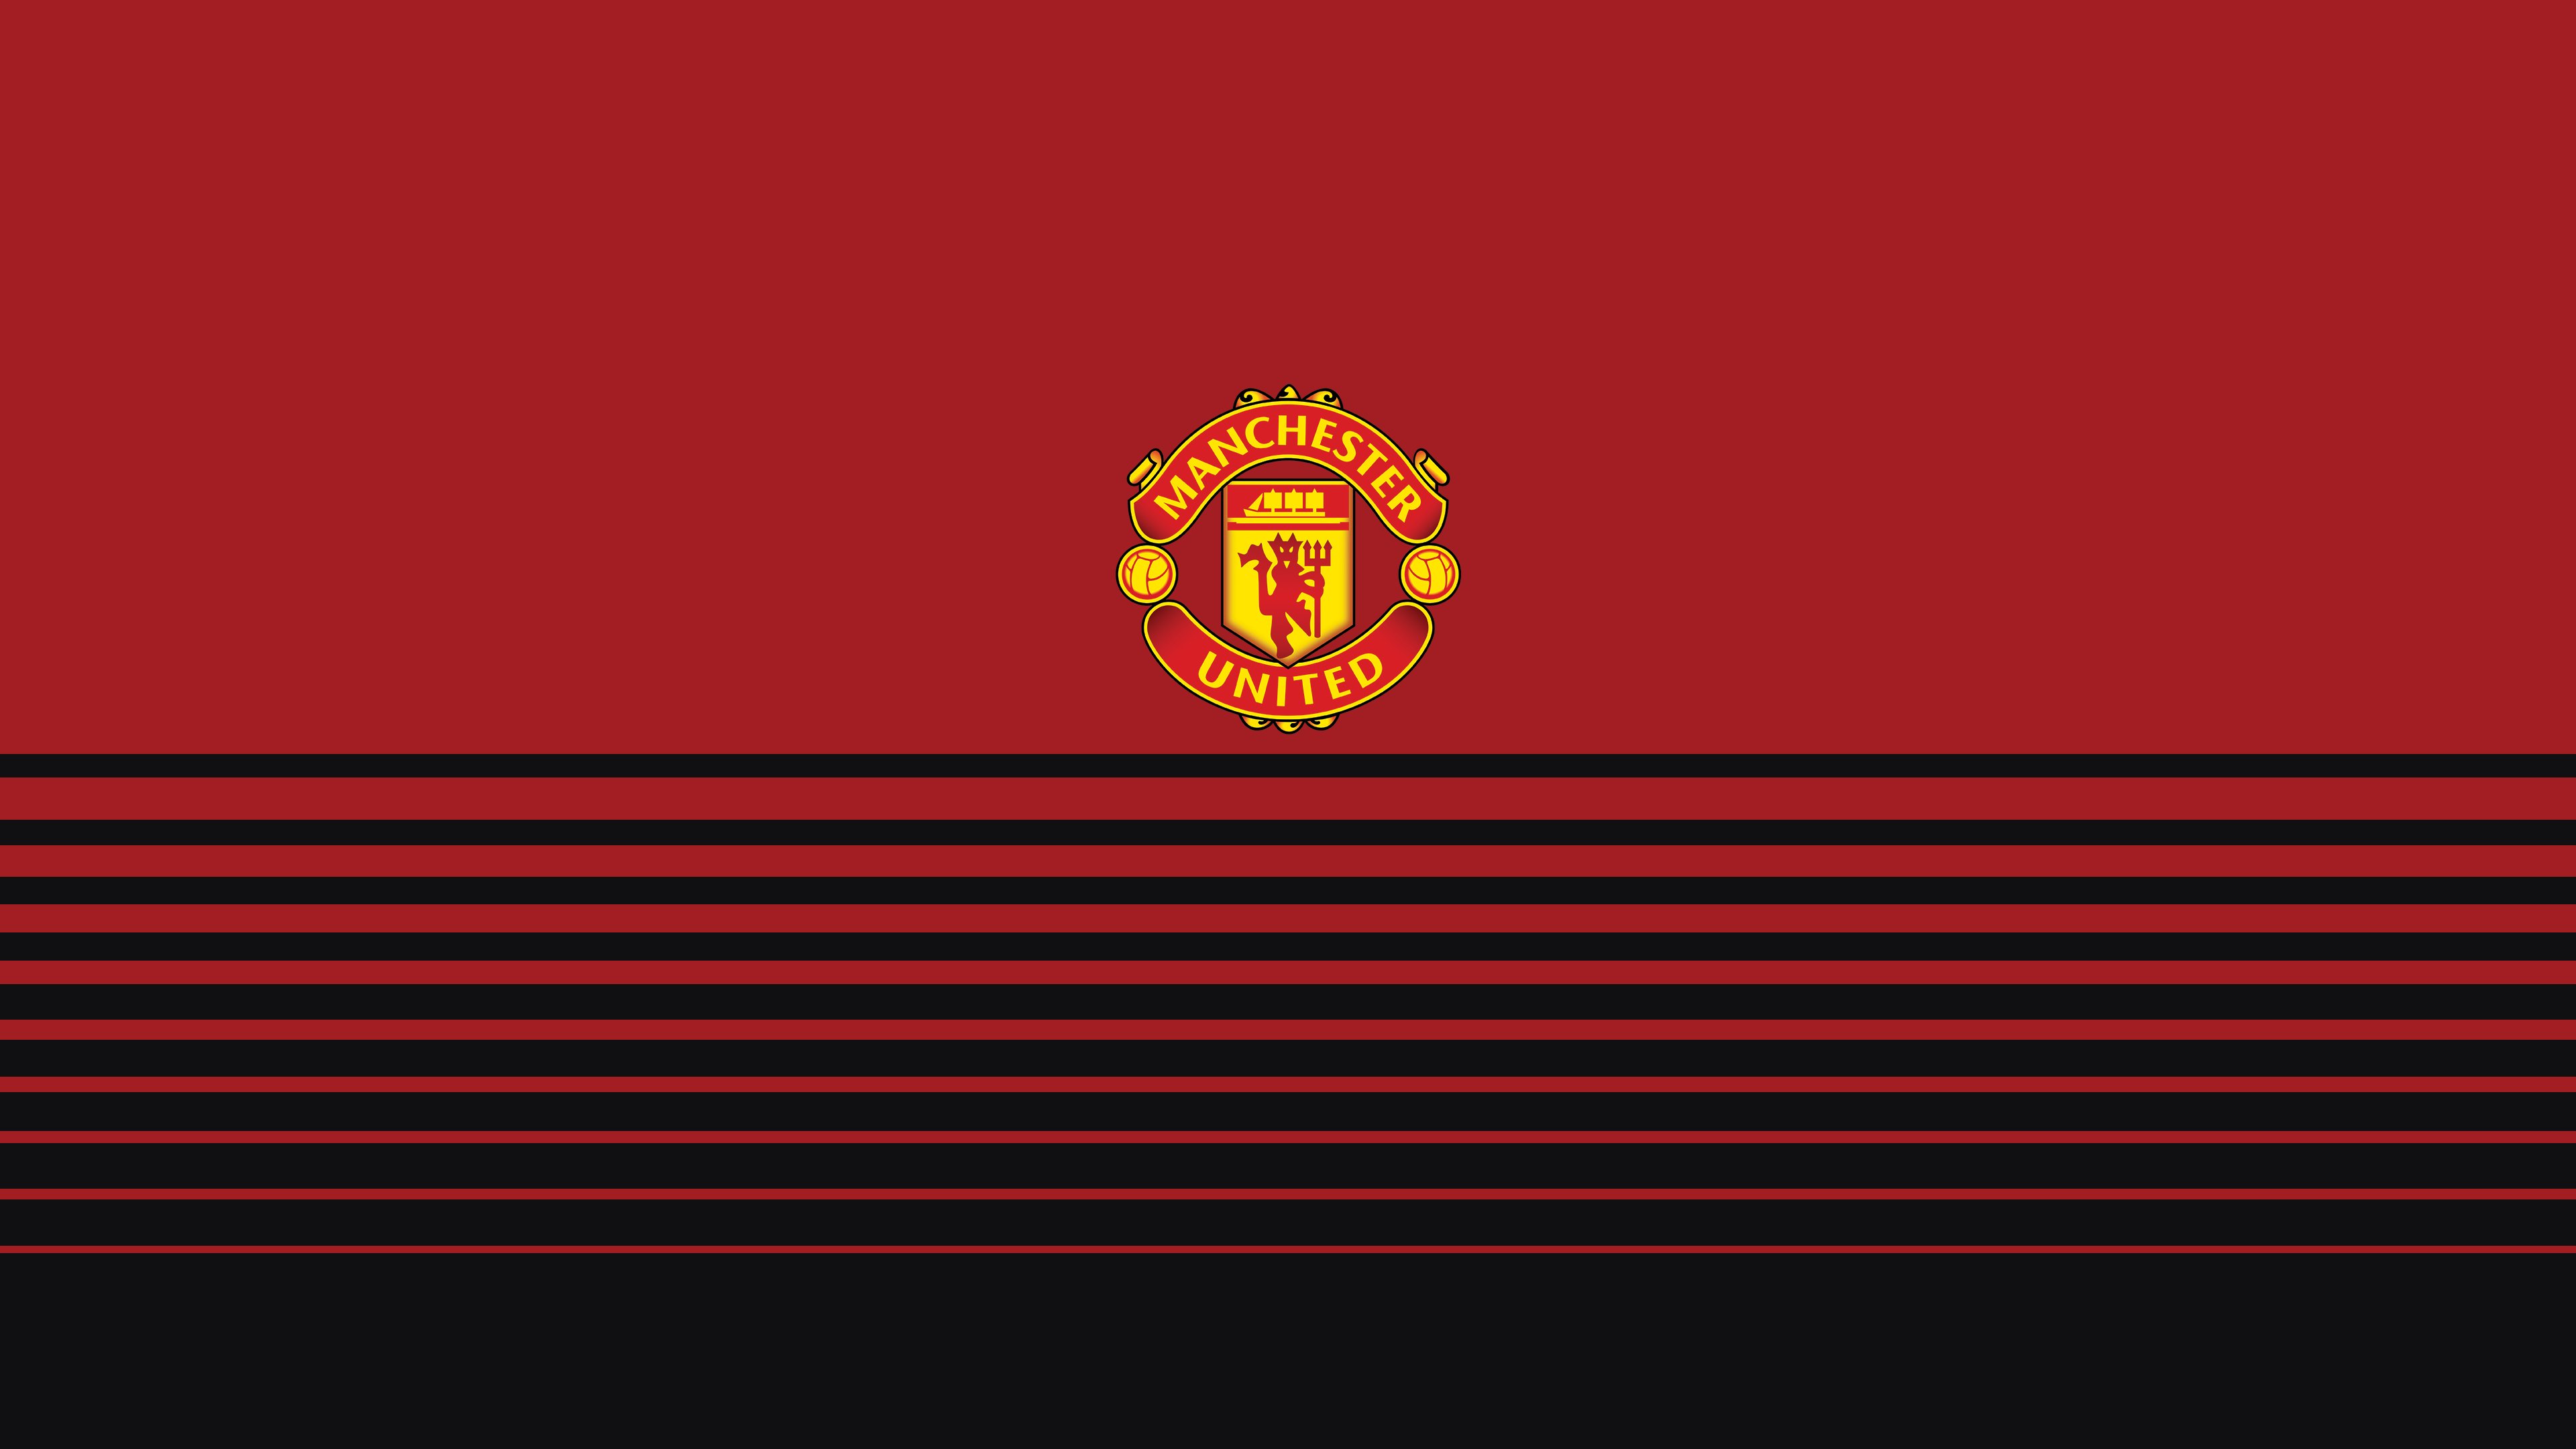 More Manchester United Wallpaper